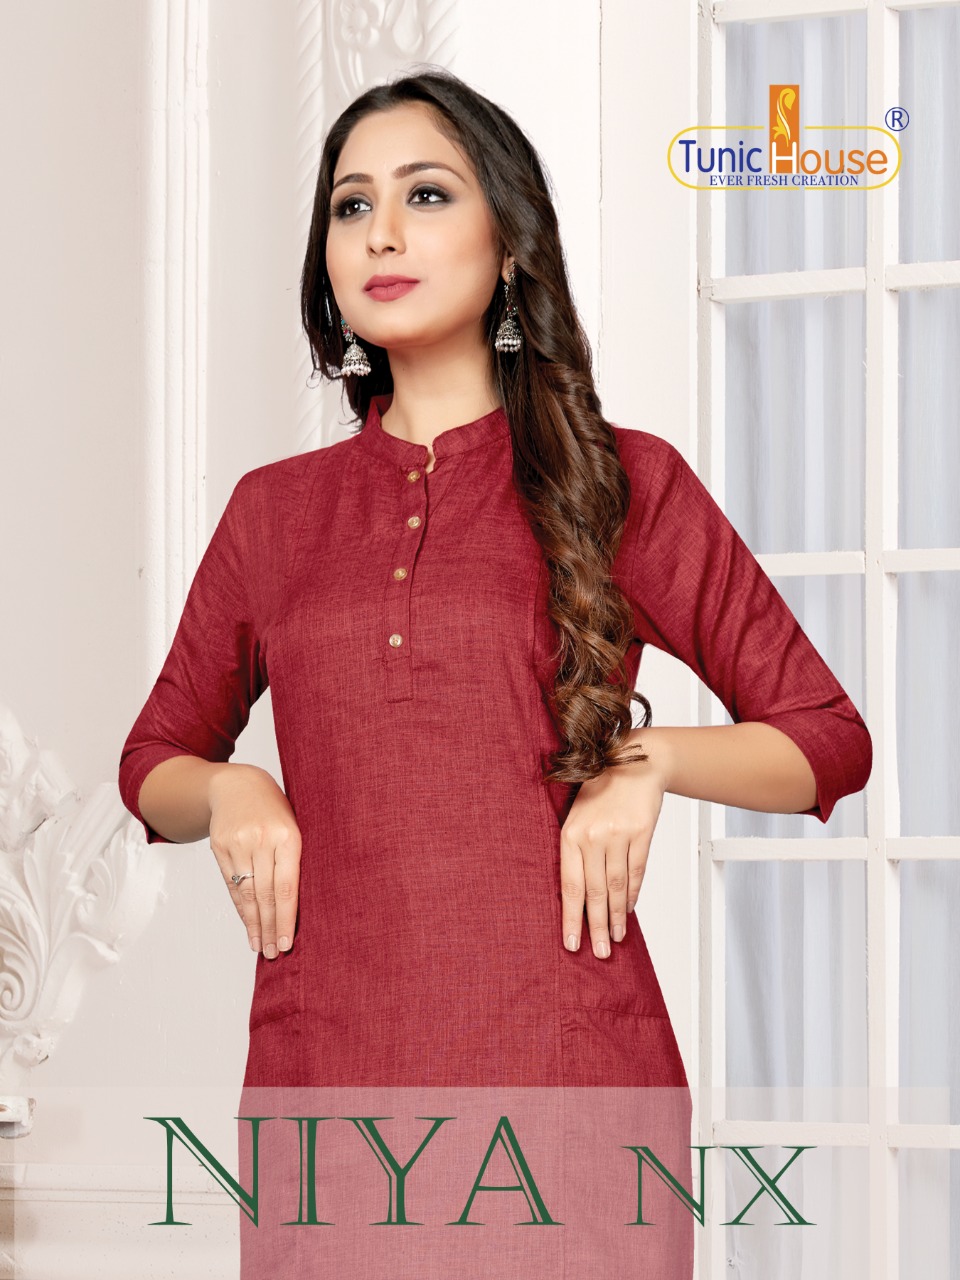 Tunic House Presents Niya Nx Soft Cotton Daily Wear Kurti At Lowest Rate In Surat Market